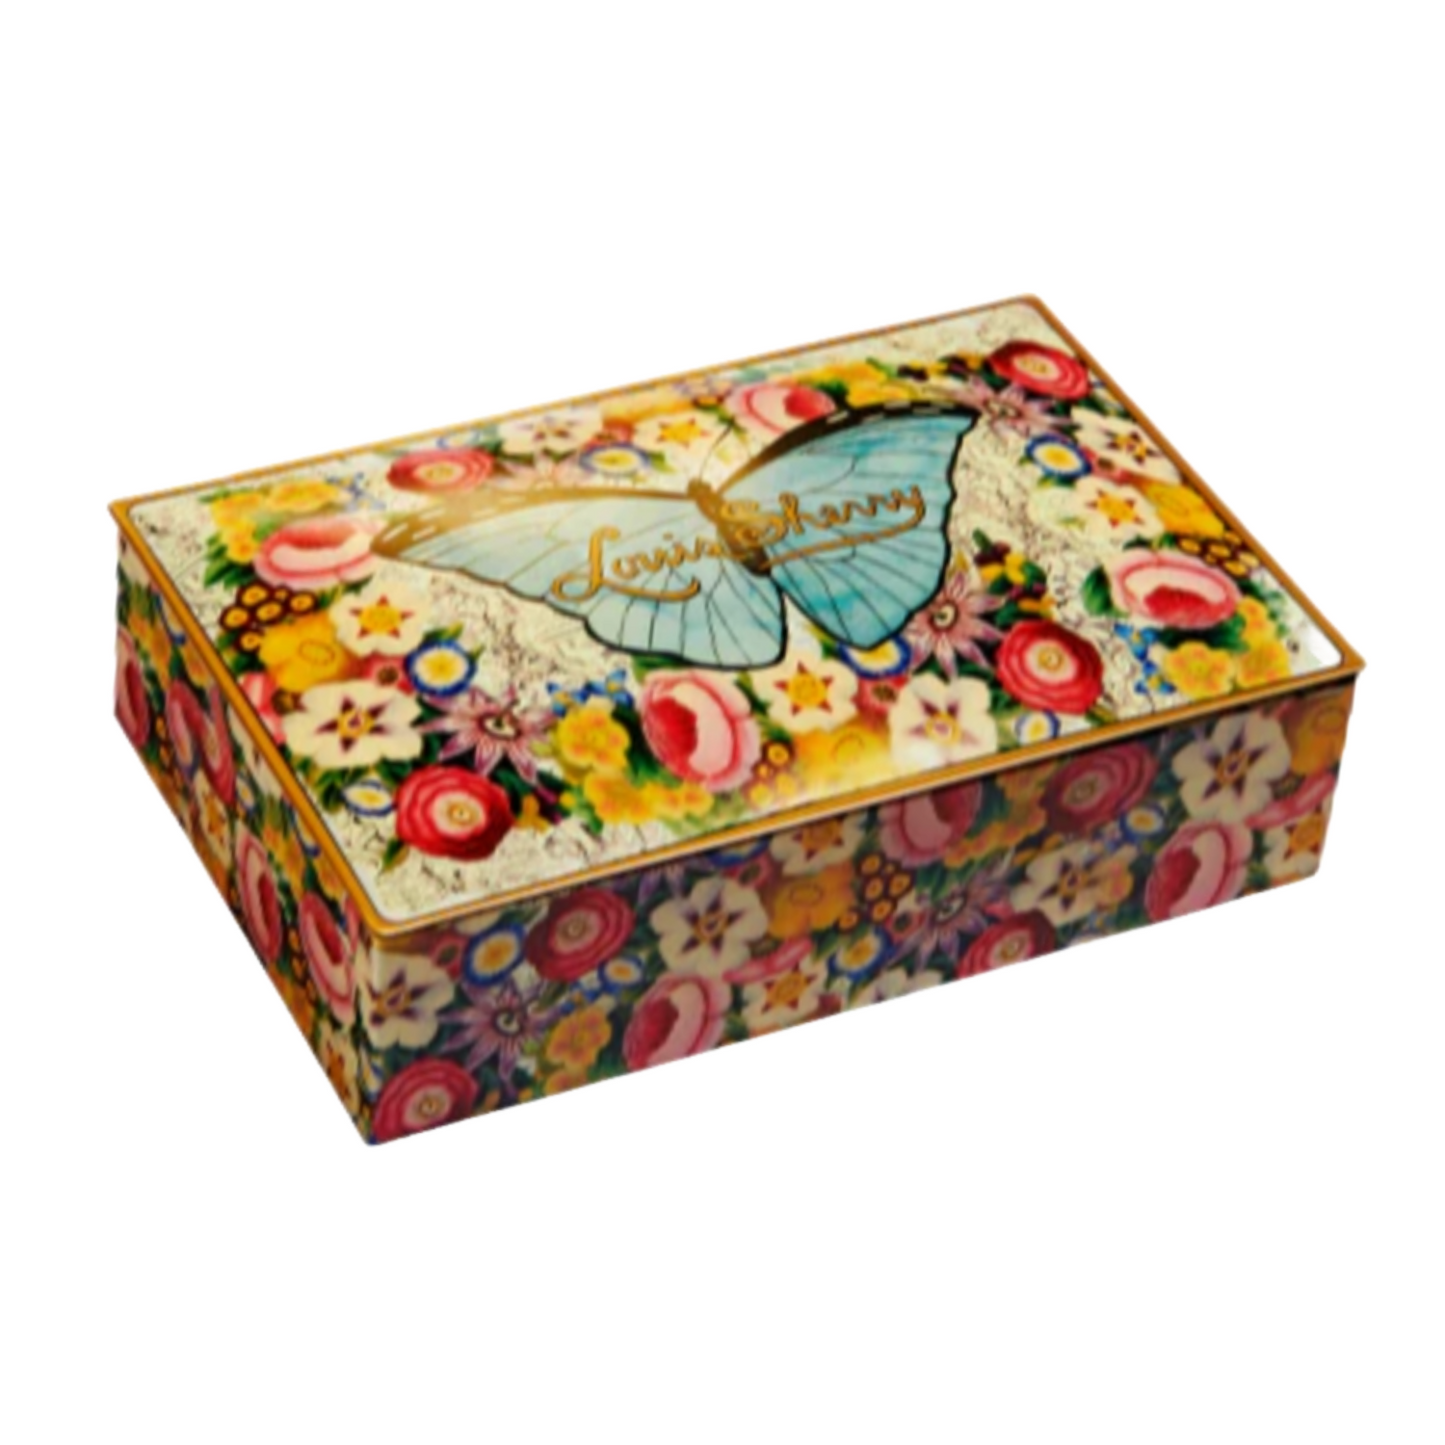 Load image into Gallery viewer, John Derian Butterfly 12-Piece Chocolate Truffle Box by Louis Sherry
